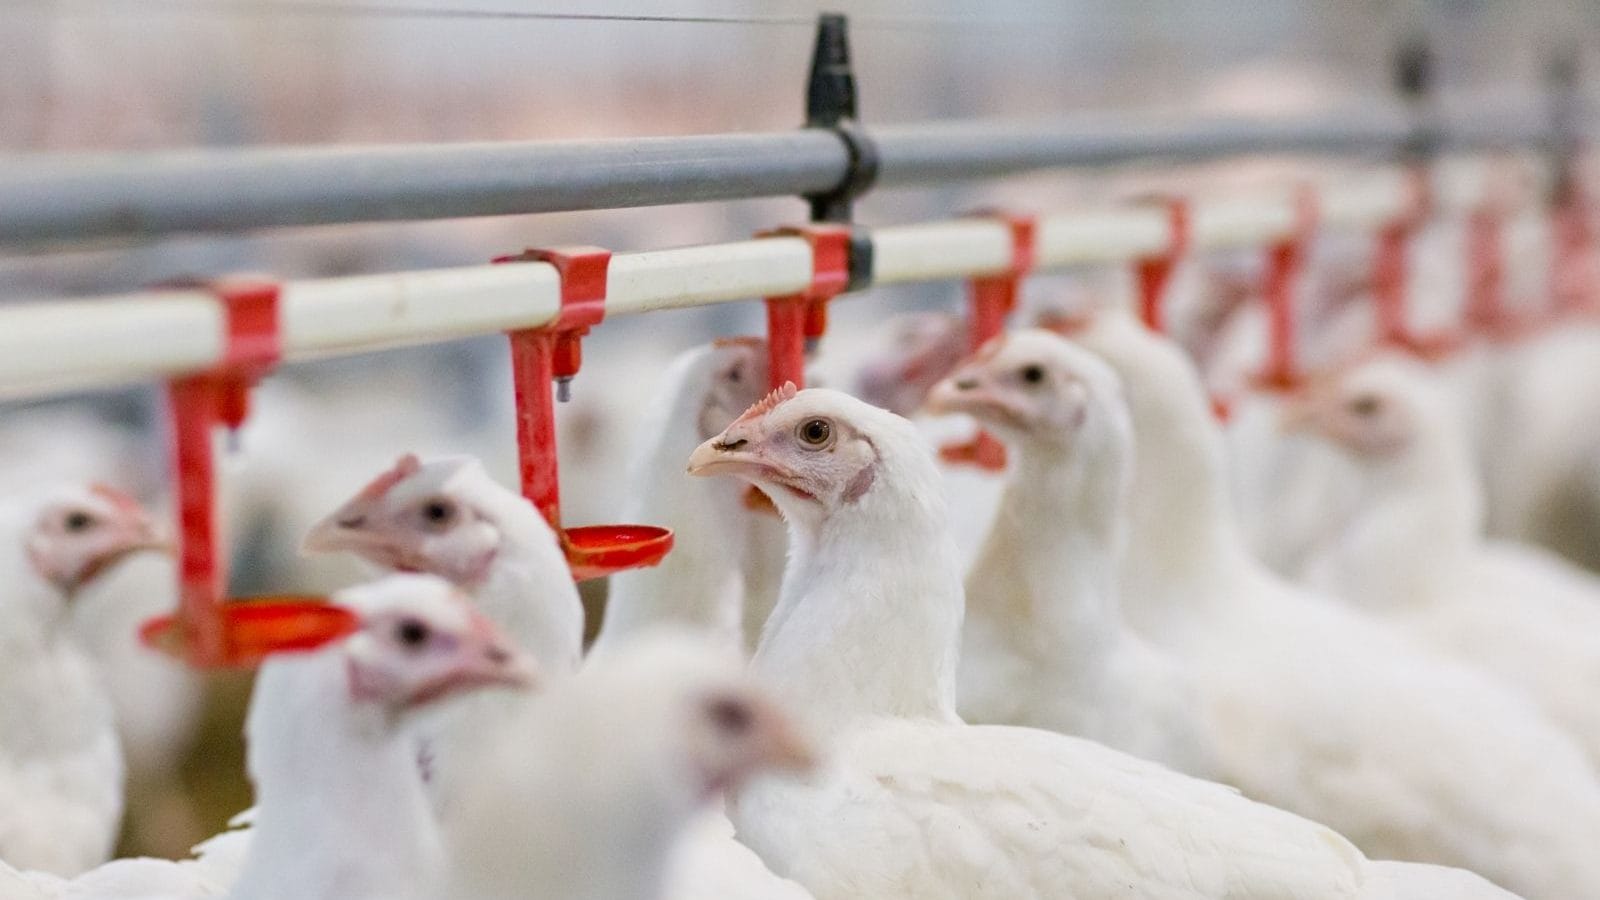 Odisha Poultry Farmer Claims 63 of His Chickens Died Due to 'Loud DJ Music'